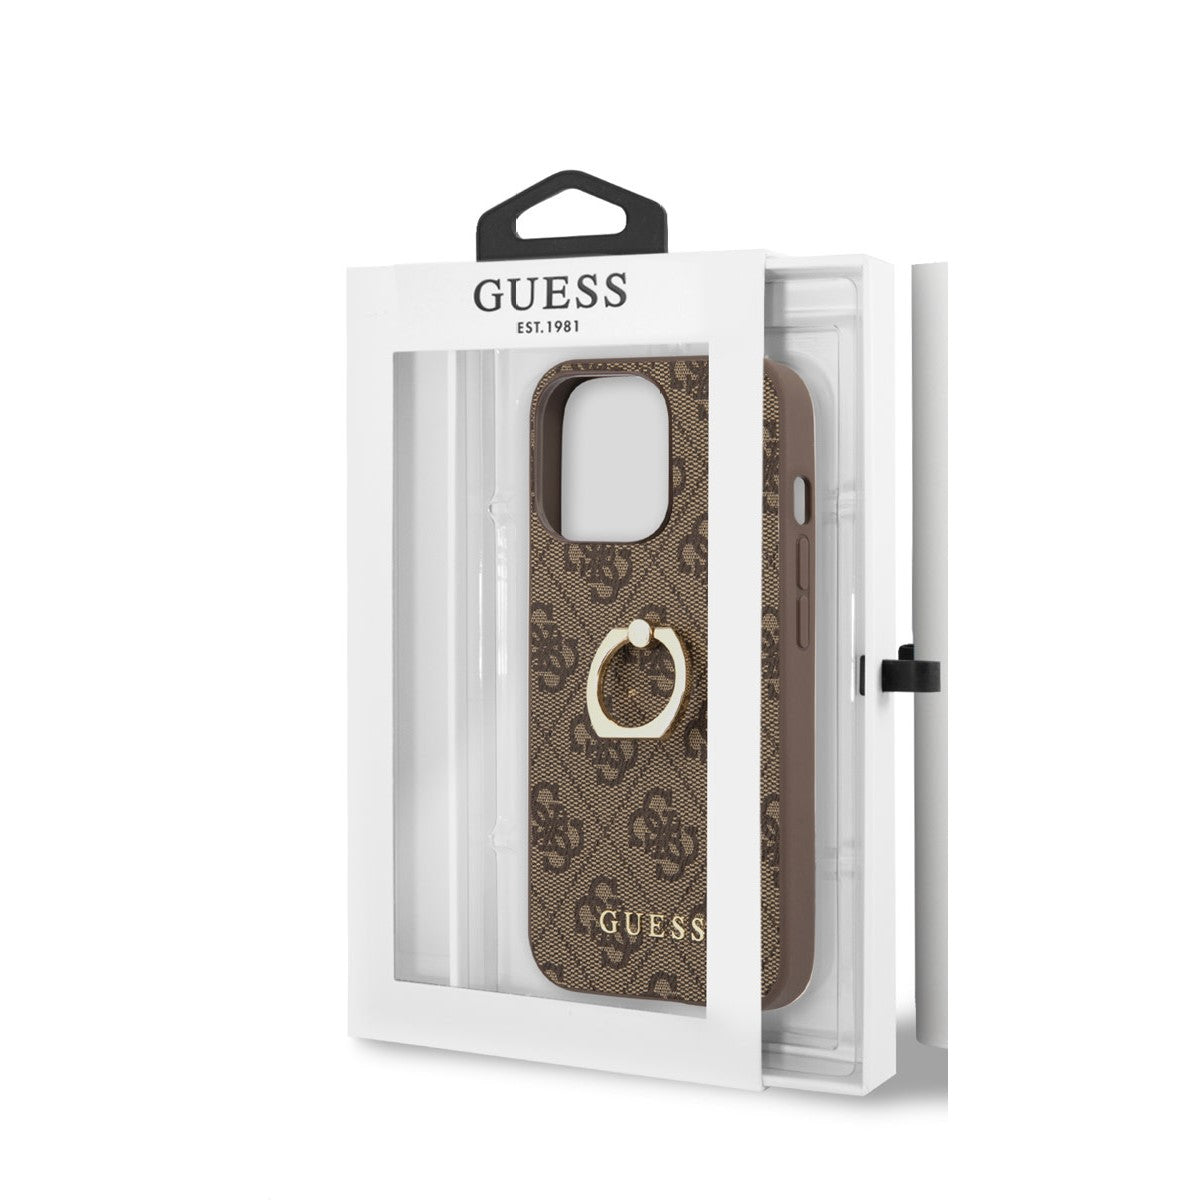 Guess iPhone 14 Pro Backcover - Met Ringhouder - Bruin